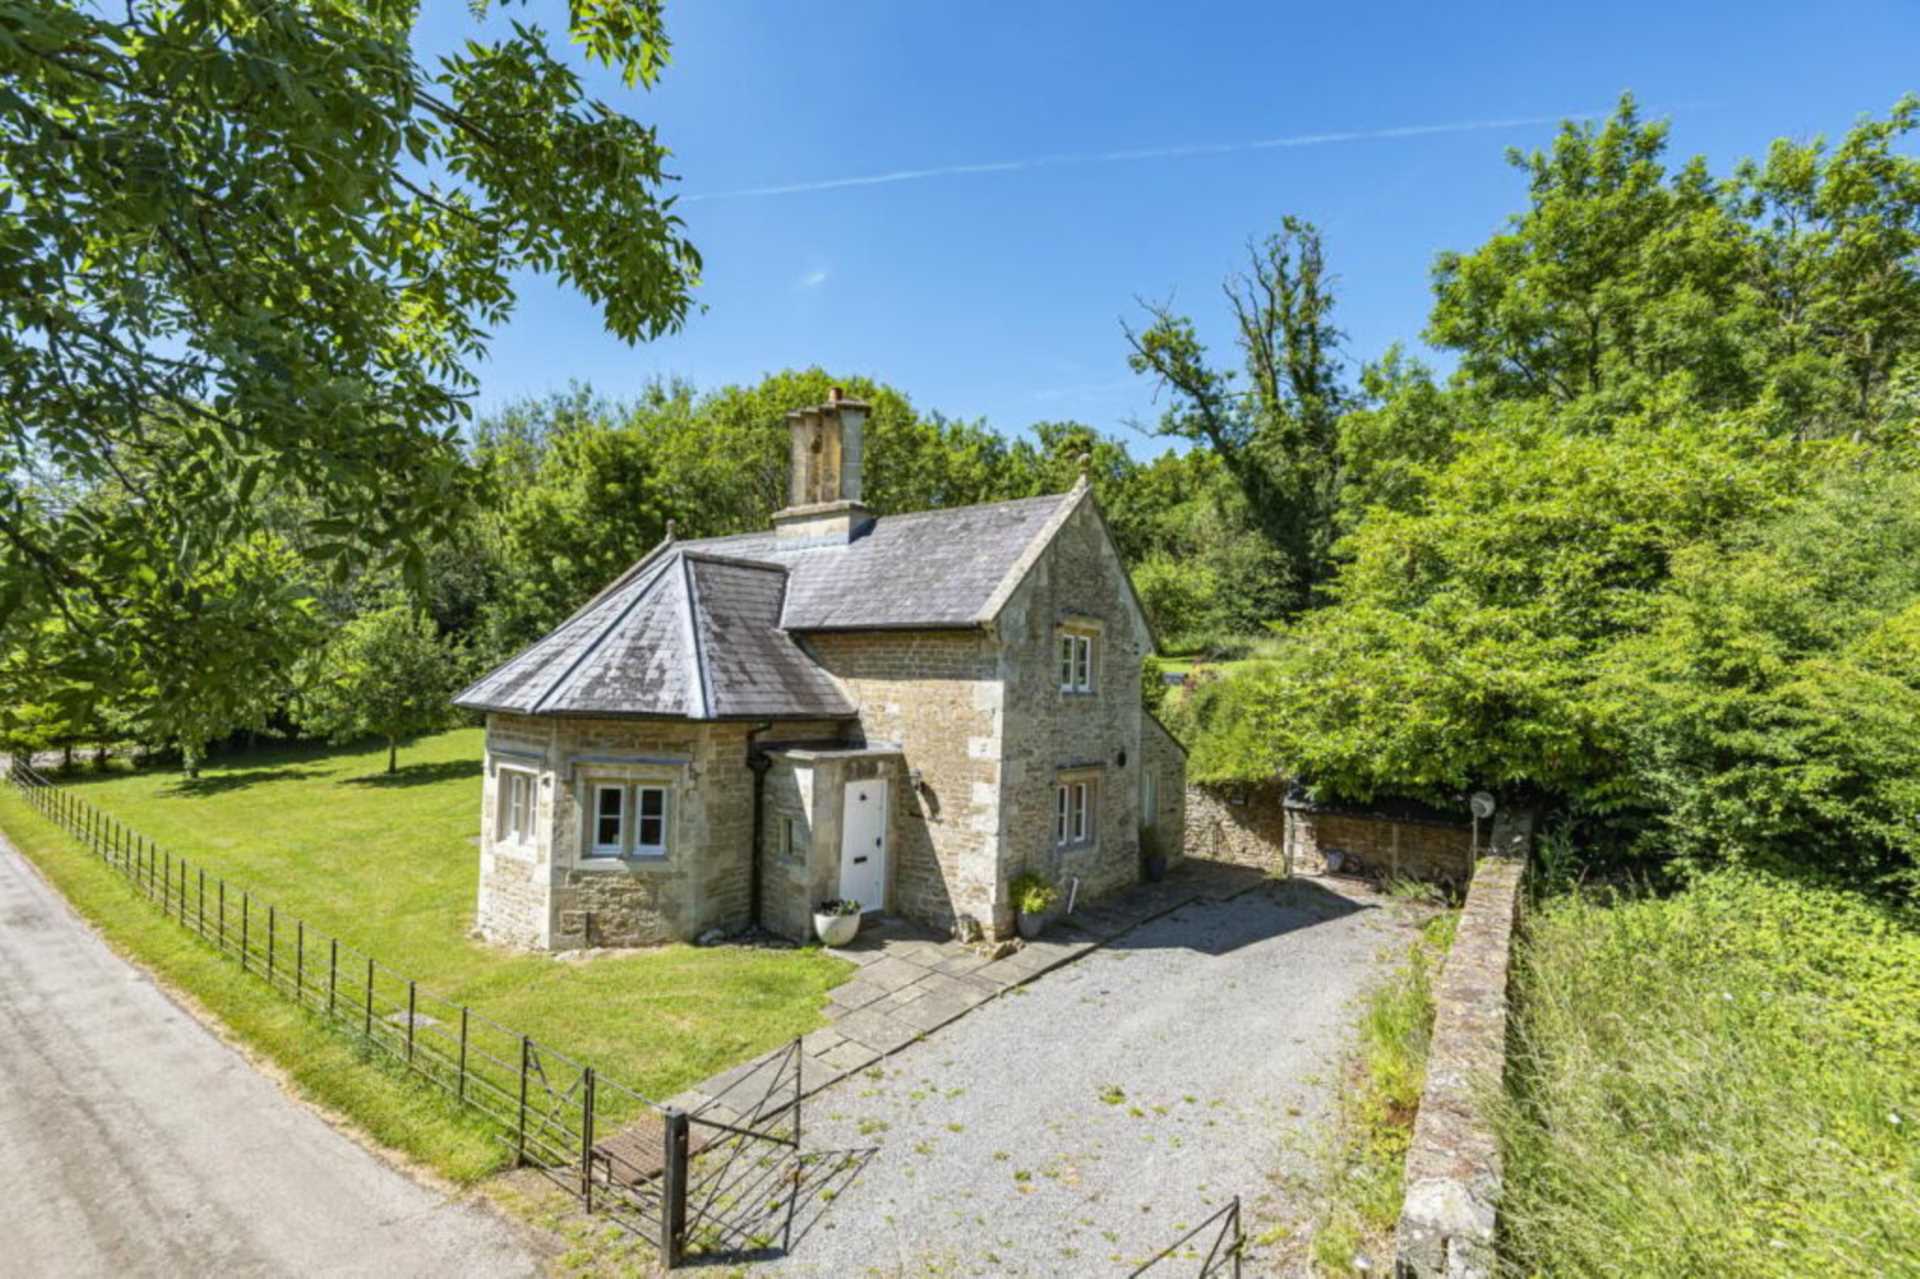 2 bed Detached House for rent in Frome. From Swallows Property Letting - Frome